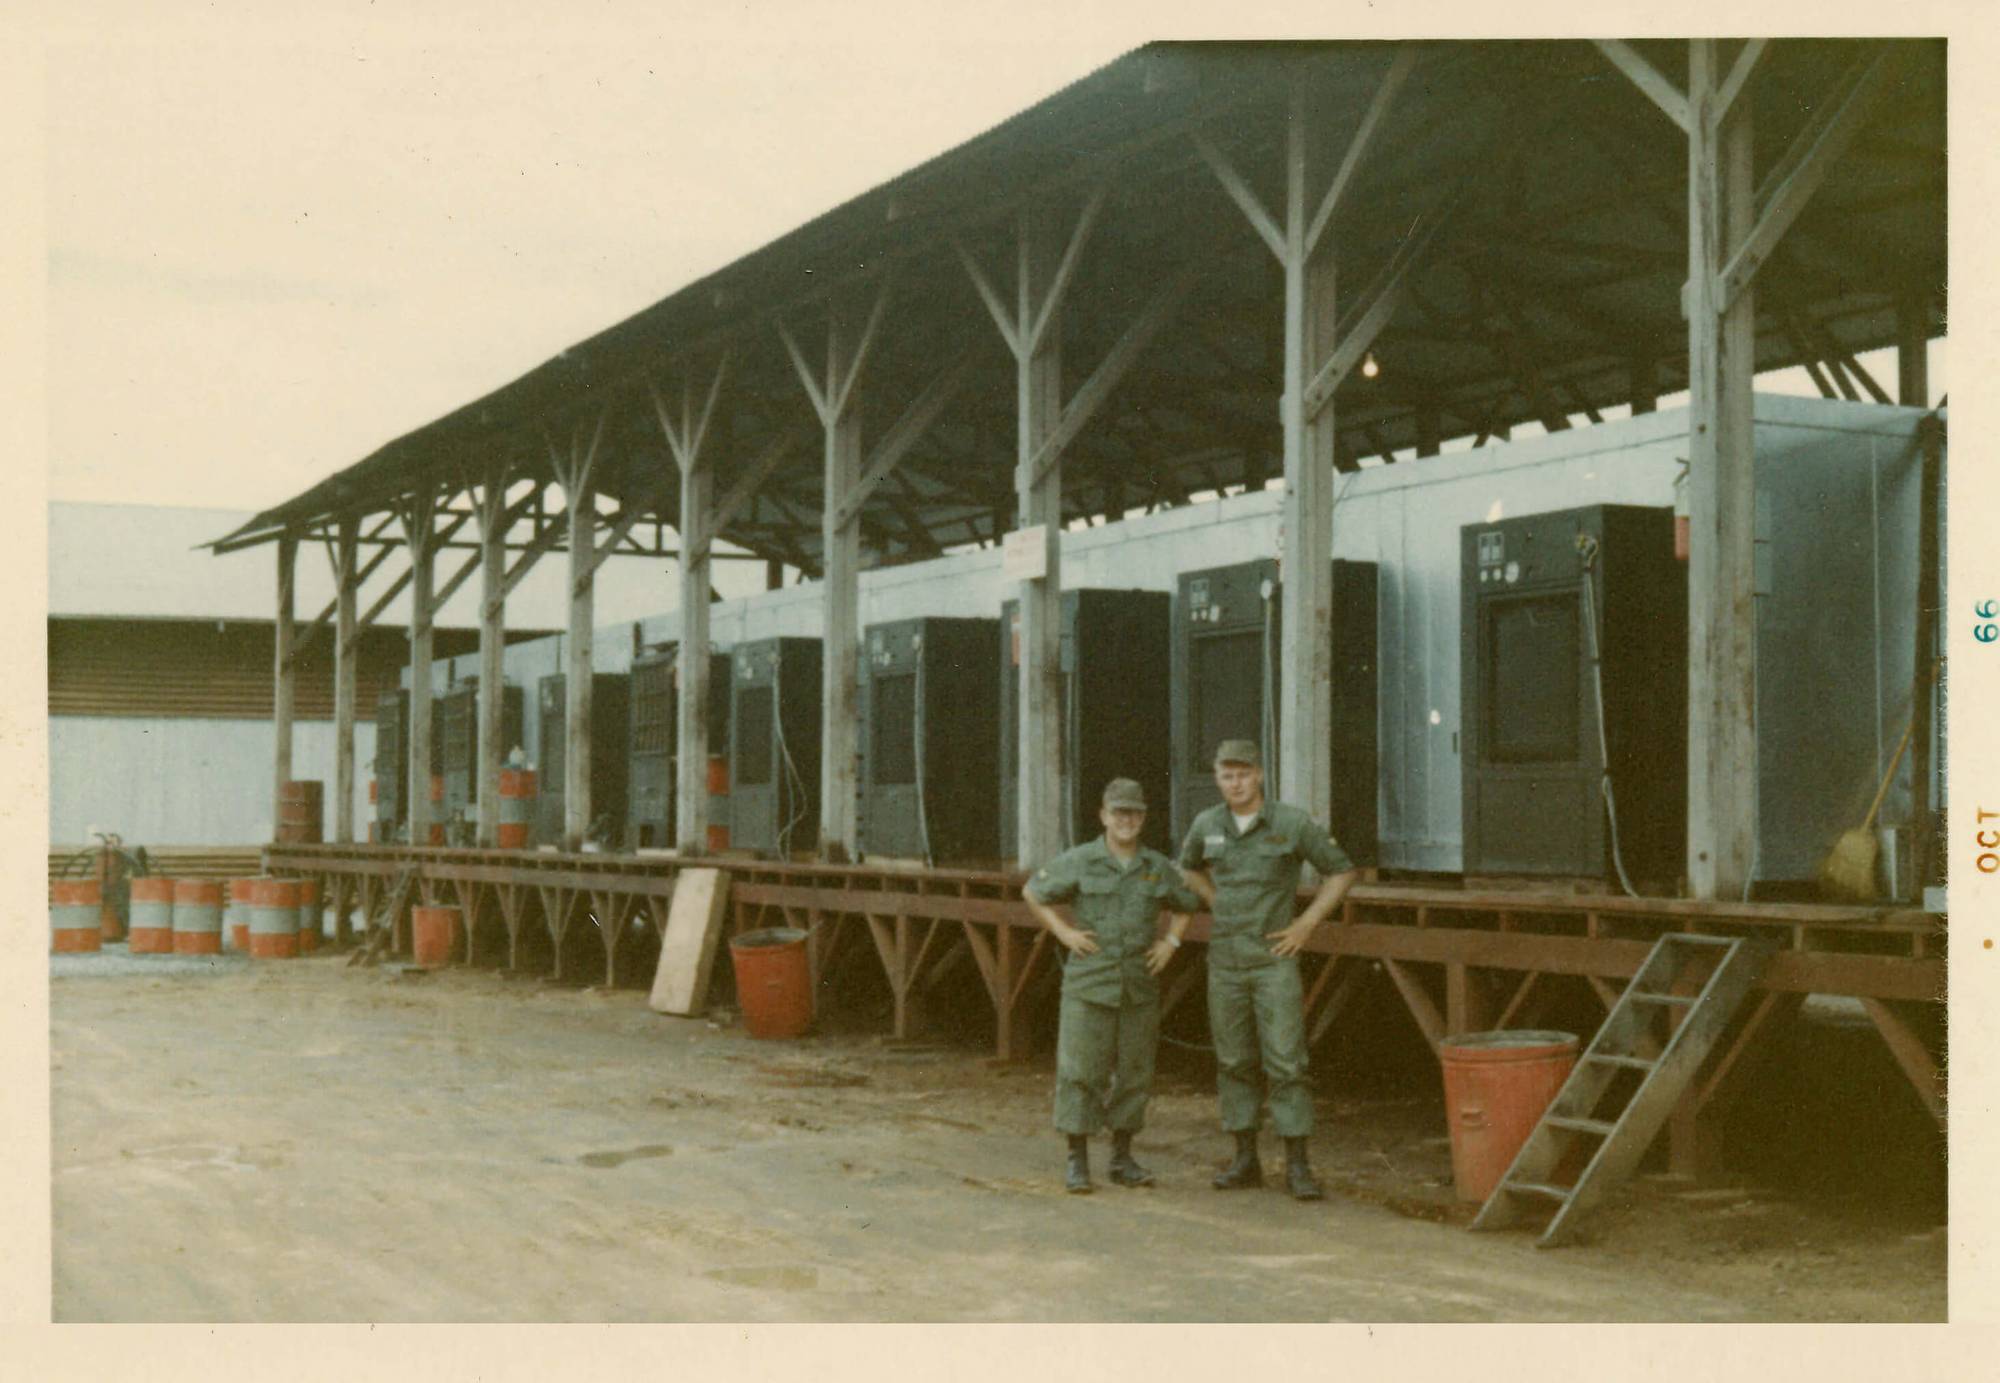 Two men in uniform posed with hands on hips, standing in front of a dock with many refrigerators on it.